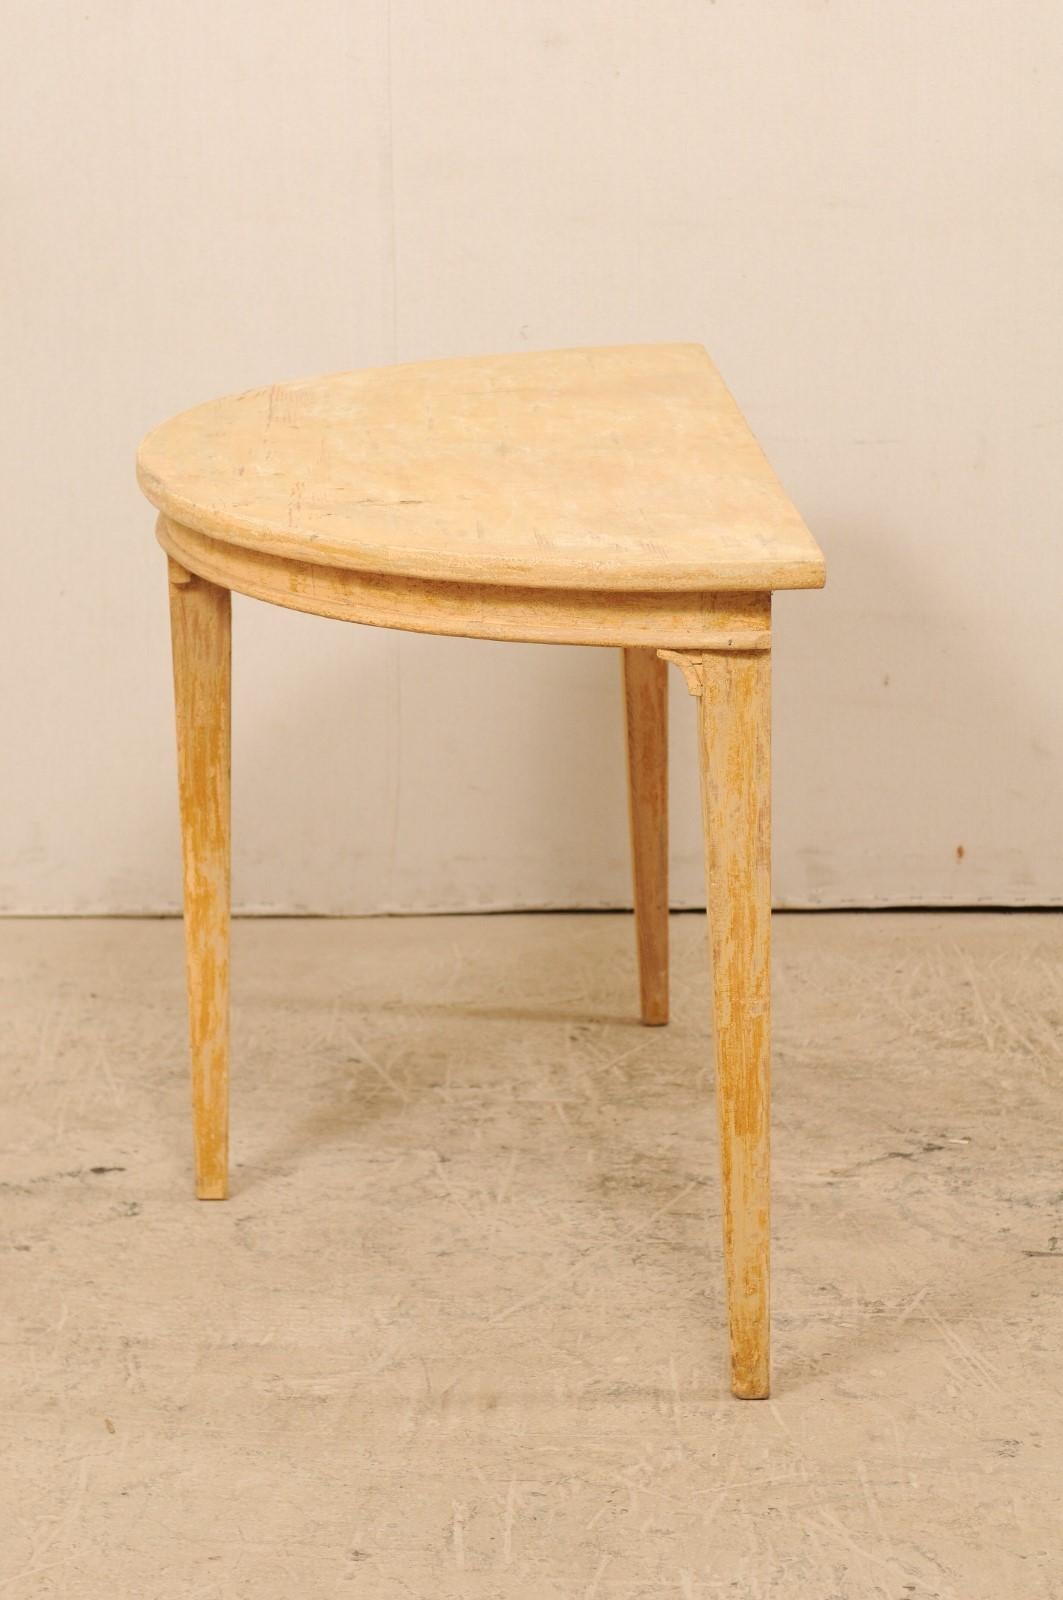 Single Swedish Demilune Light Wood Table from the 19th Century 2